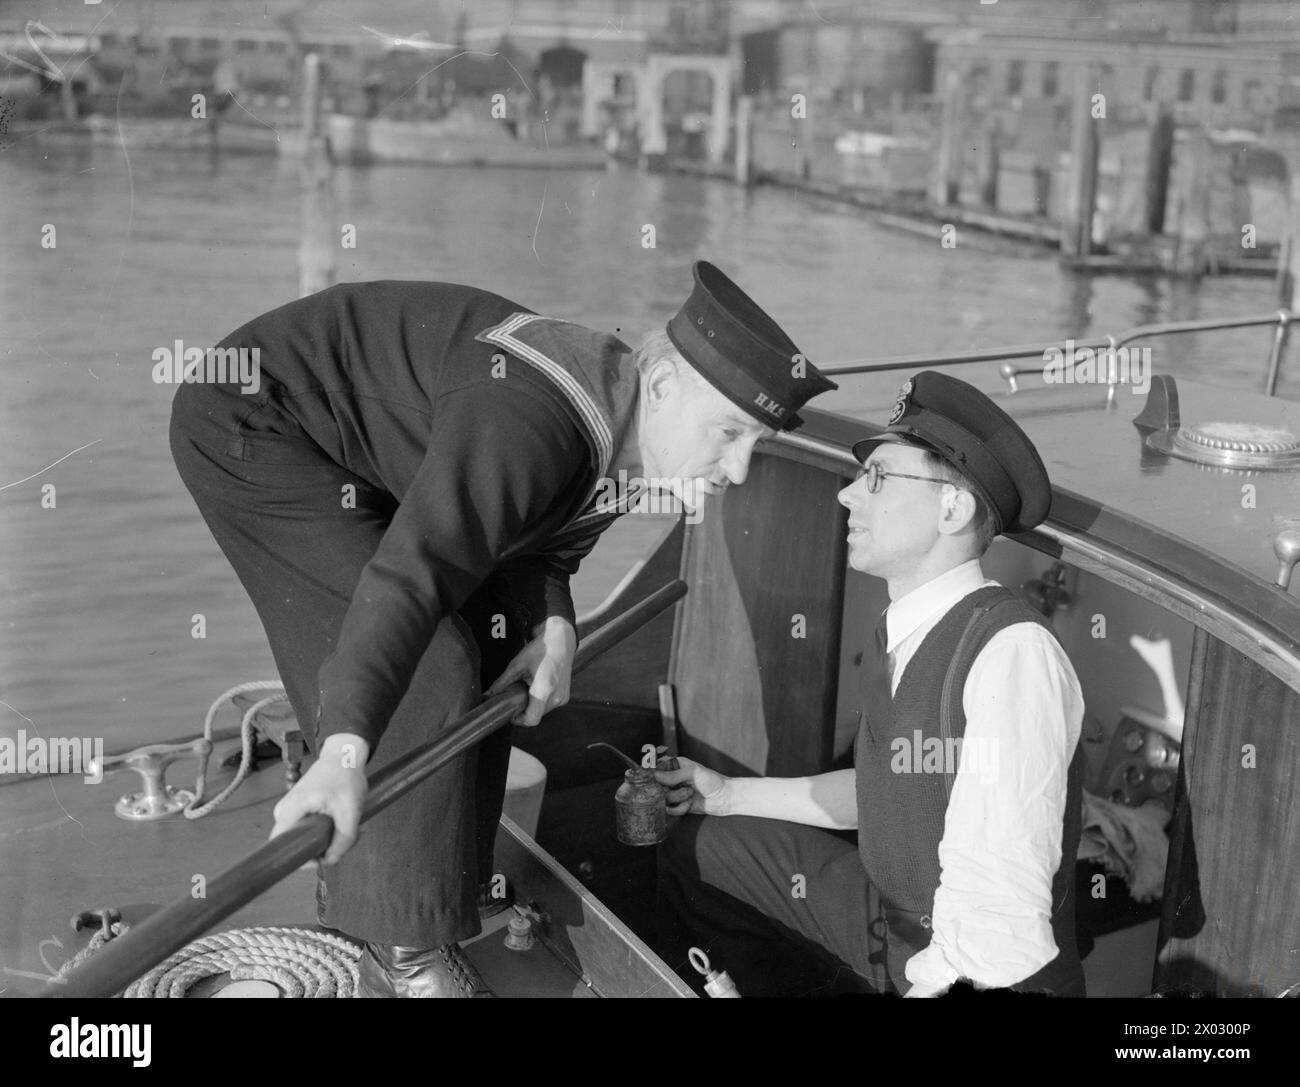 ADMIRAL'S BARGE VETERANS; THEIR AGES TOTAL 266 YEARS. 19 JANUARY 1943, PORTSMOUTH. - Left to right: Able Seaman E J Beals (51) of Milton, near Portsmouth, with Petty Officer A Connell (30) of Copnor, Portsmouth Stock Photo